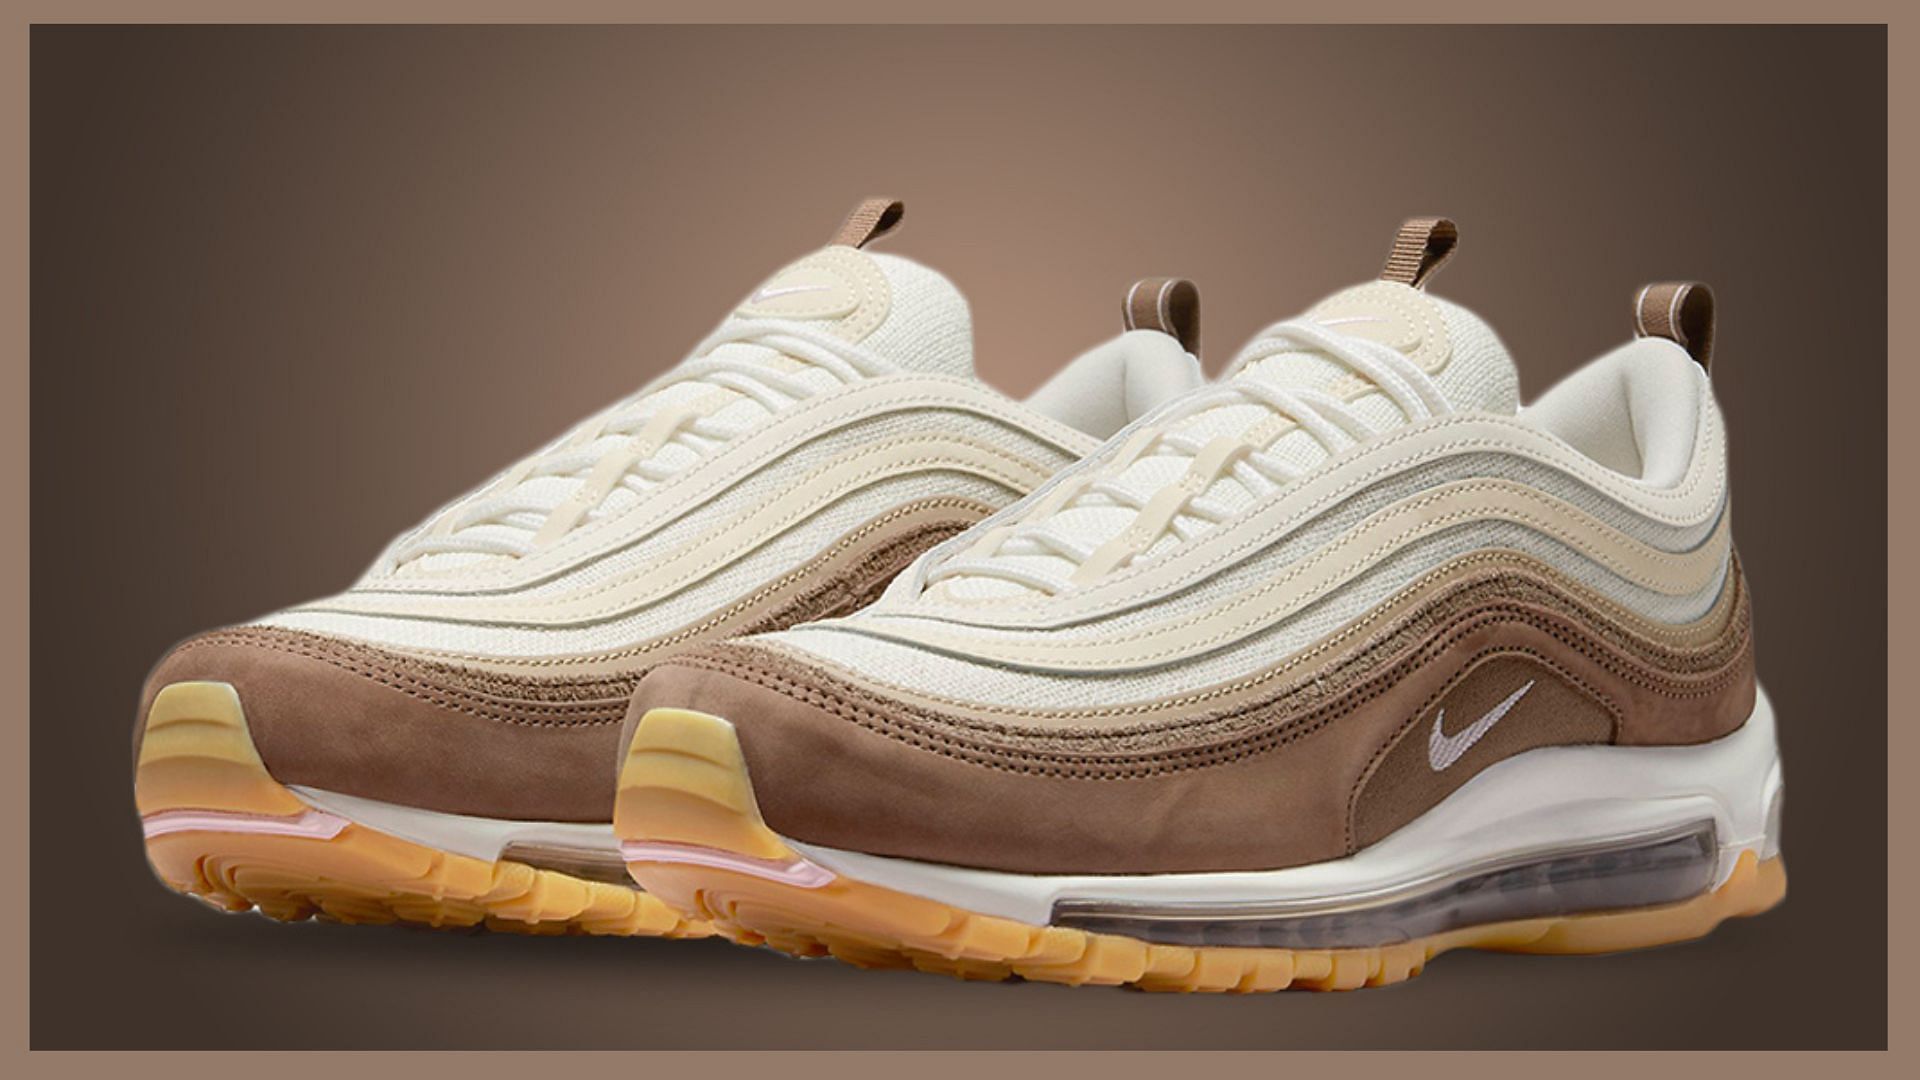 Where to buy Nike Max 97 Muslin and Pink Foam colorway? Price, release date, and more details explored